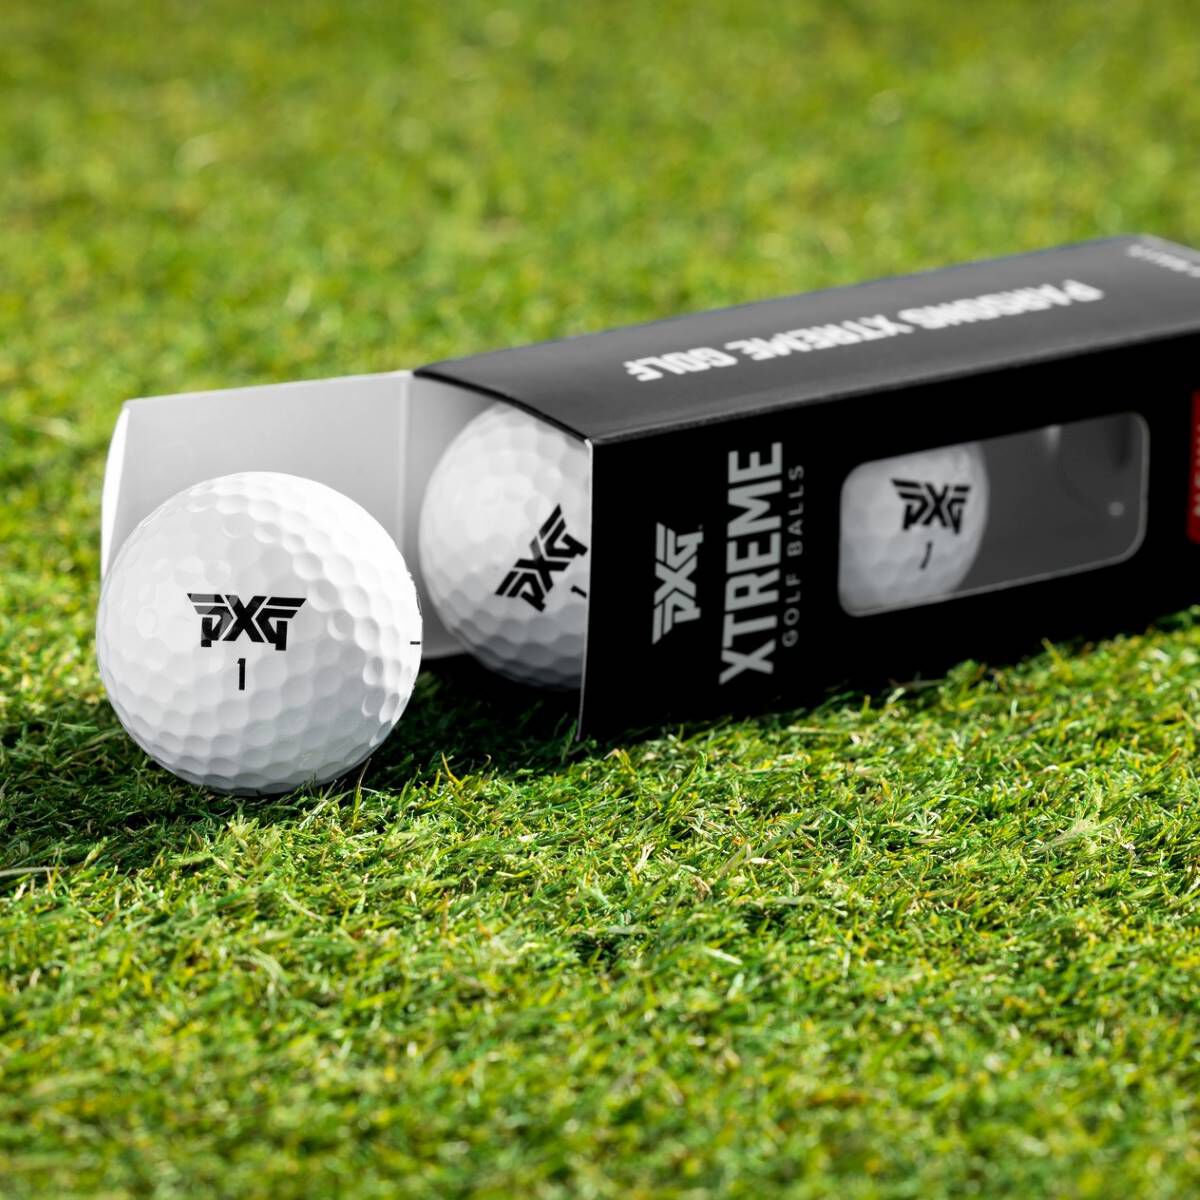 PXG Xtreme Premium Golf Balls - Air Force - FREE SHIPPING on 4+ boxes! 